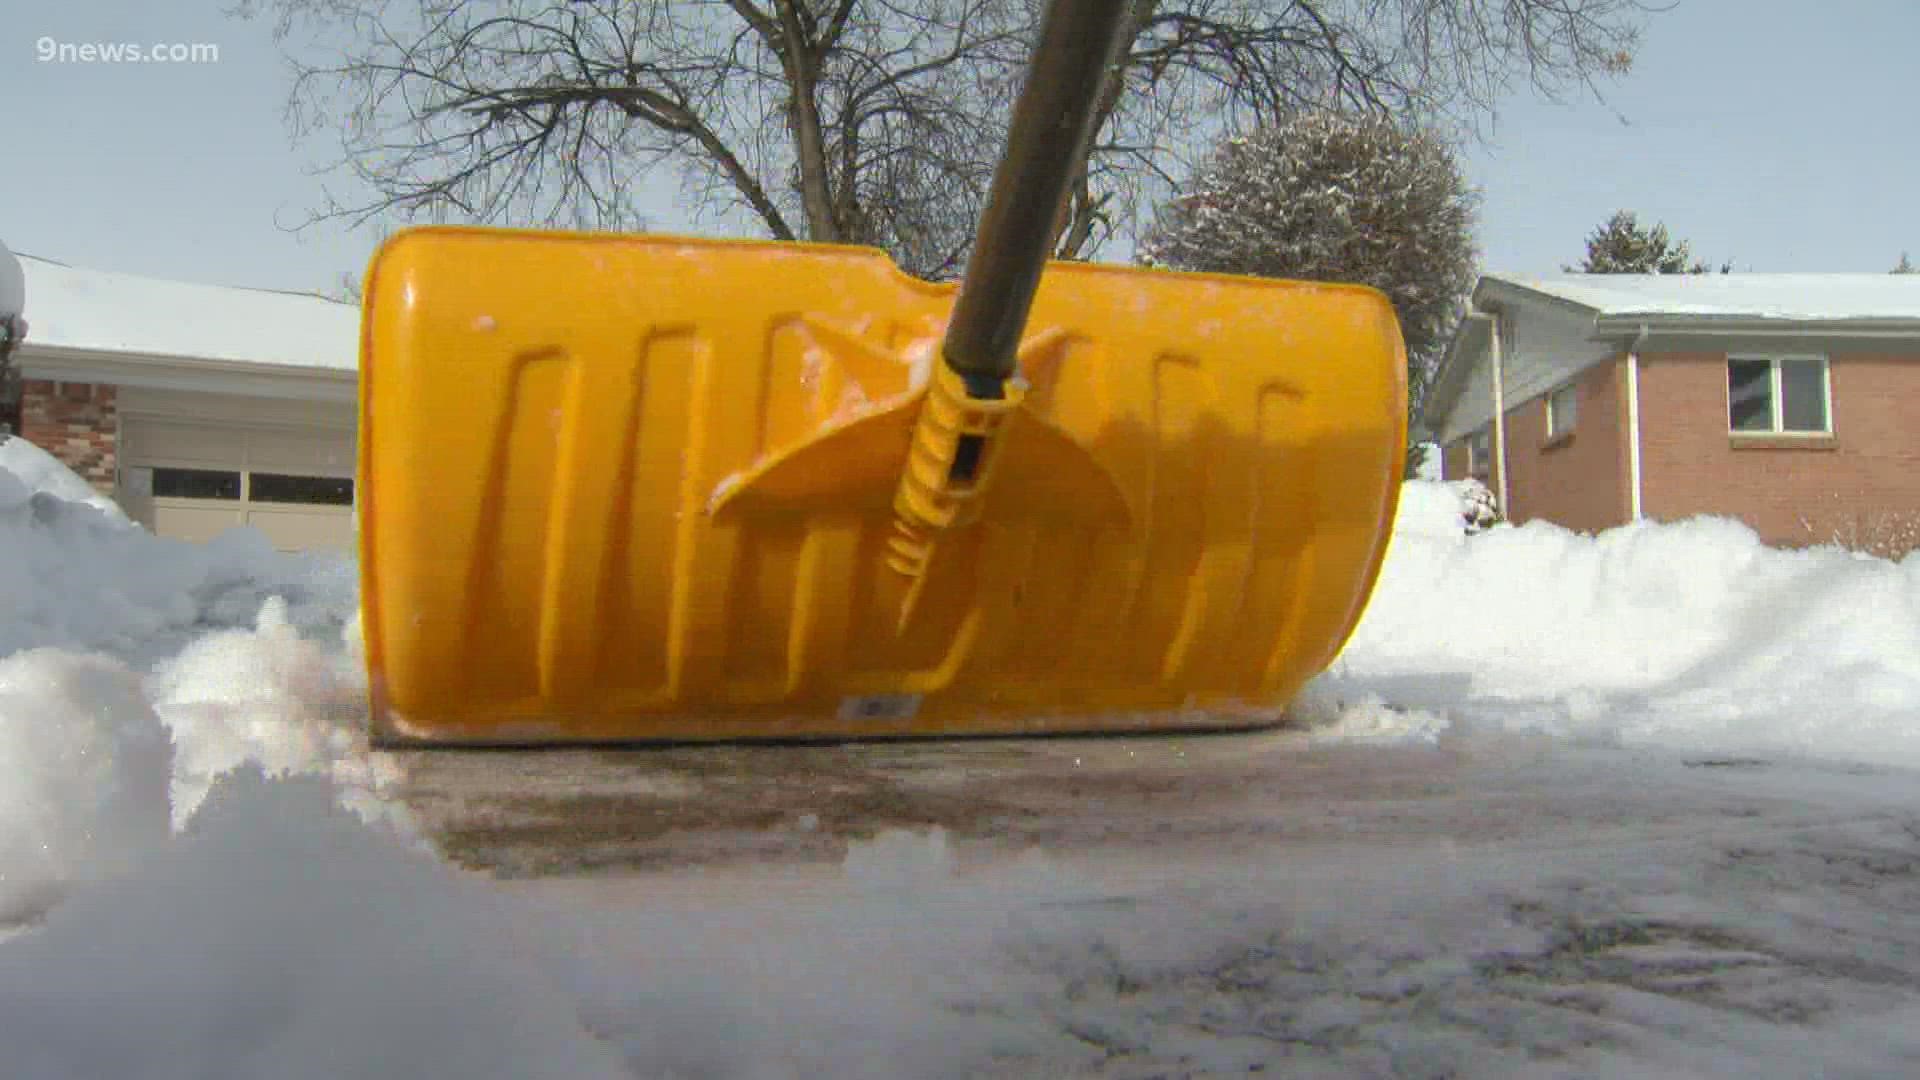 A Little Help, a nonprofit based in Denver, helps senior citizens with whatever they might need. Today, it was shoveling the snow.